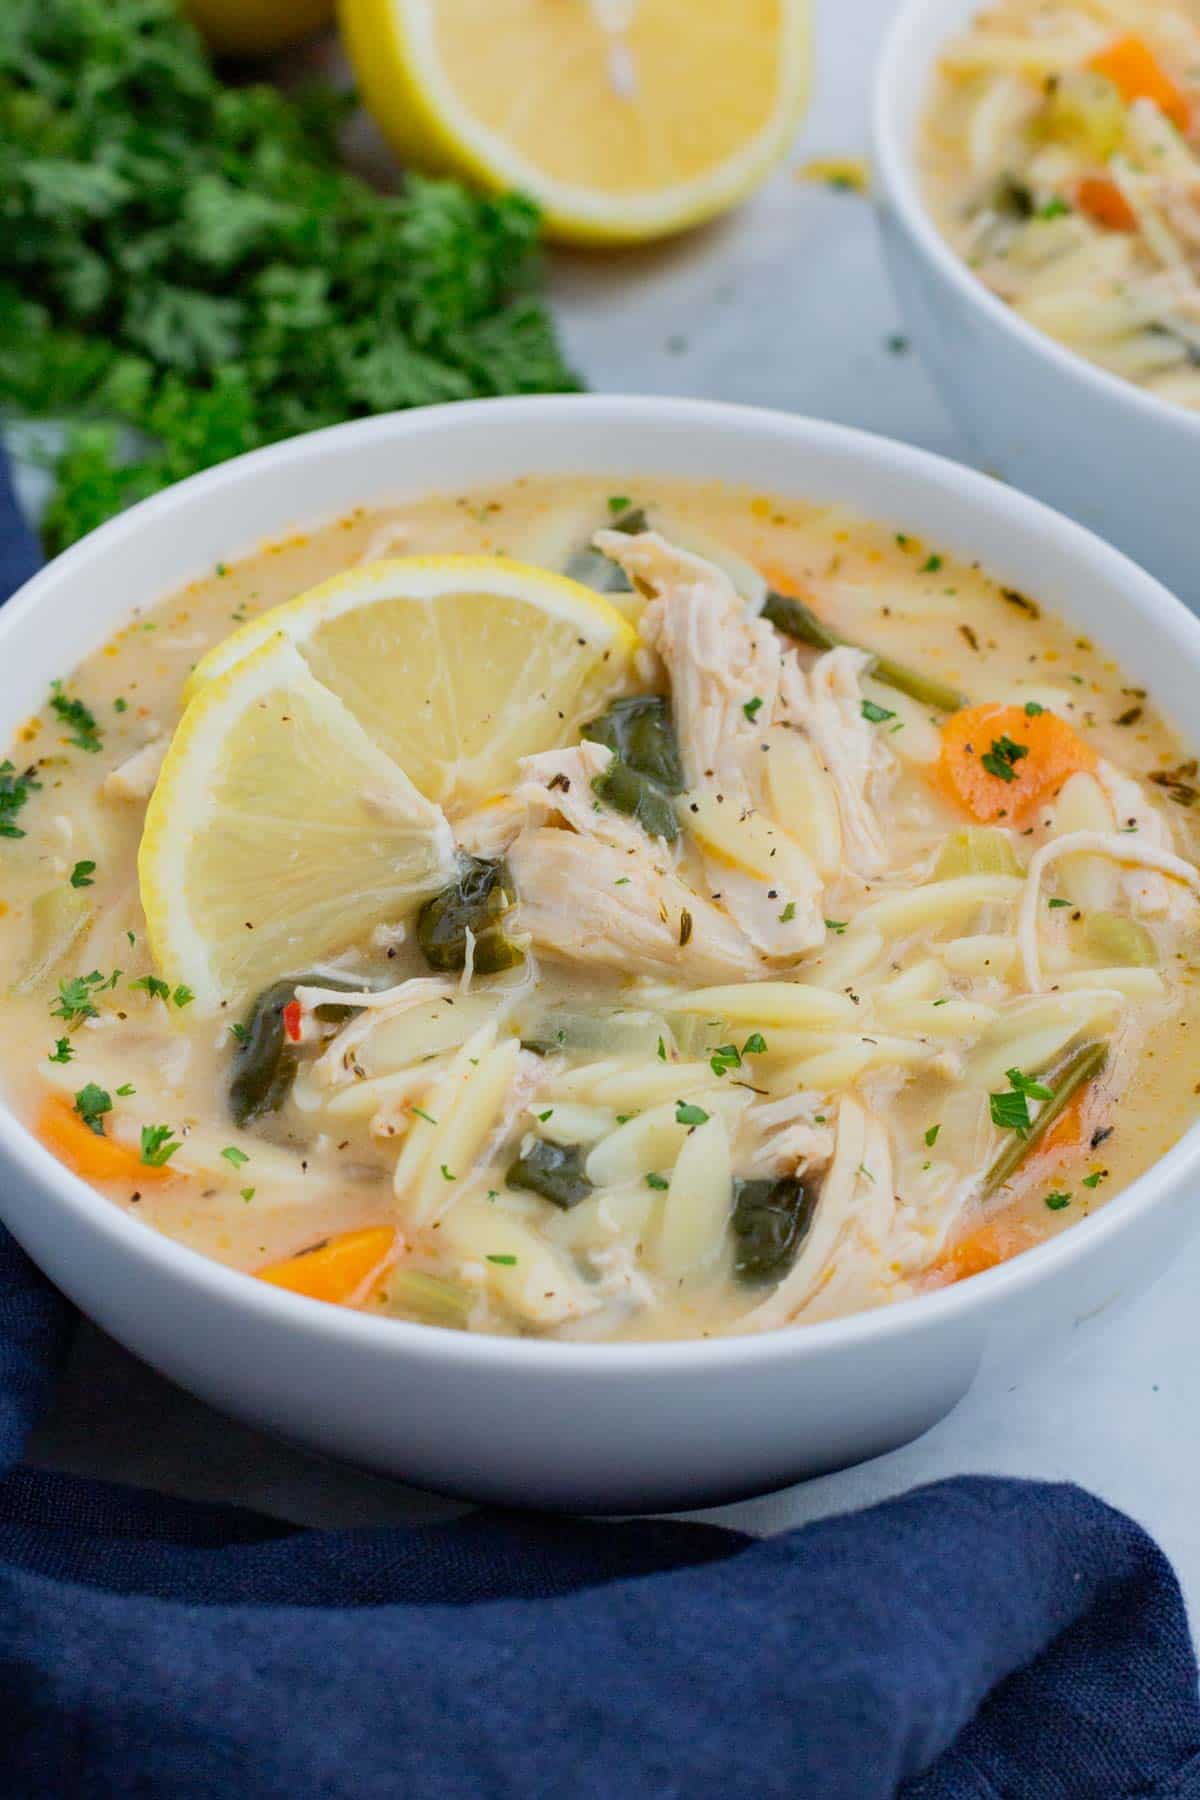 Lemon chicken orzo soup is full of healthy veggies, chicken, and orzo pasta and cooked on the stove.